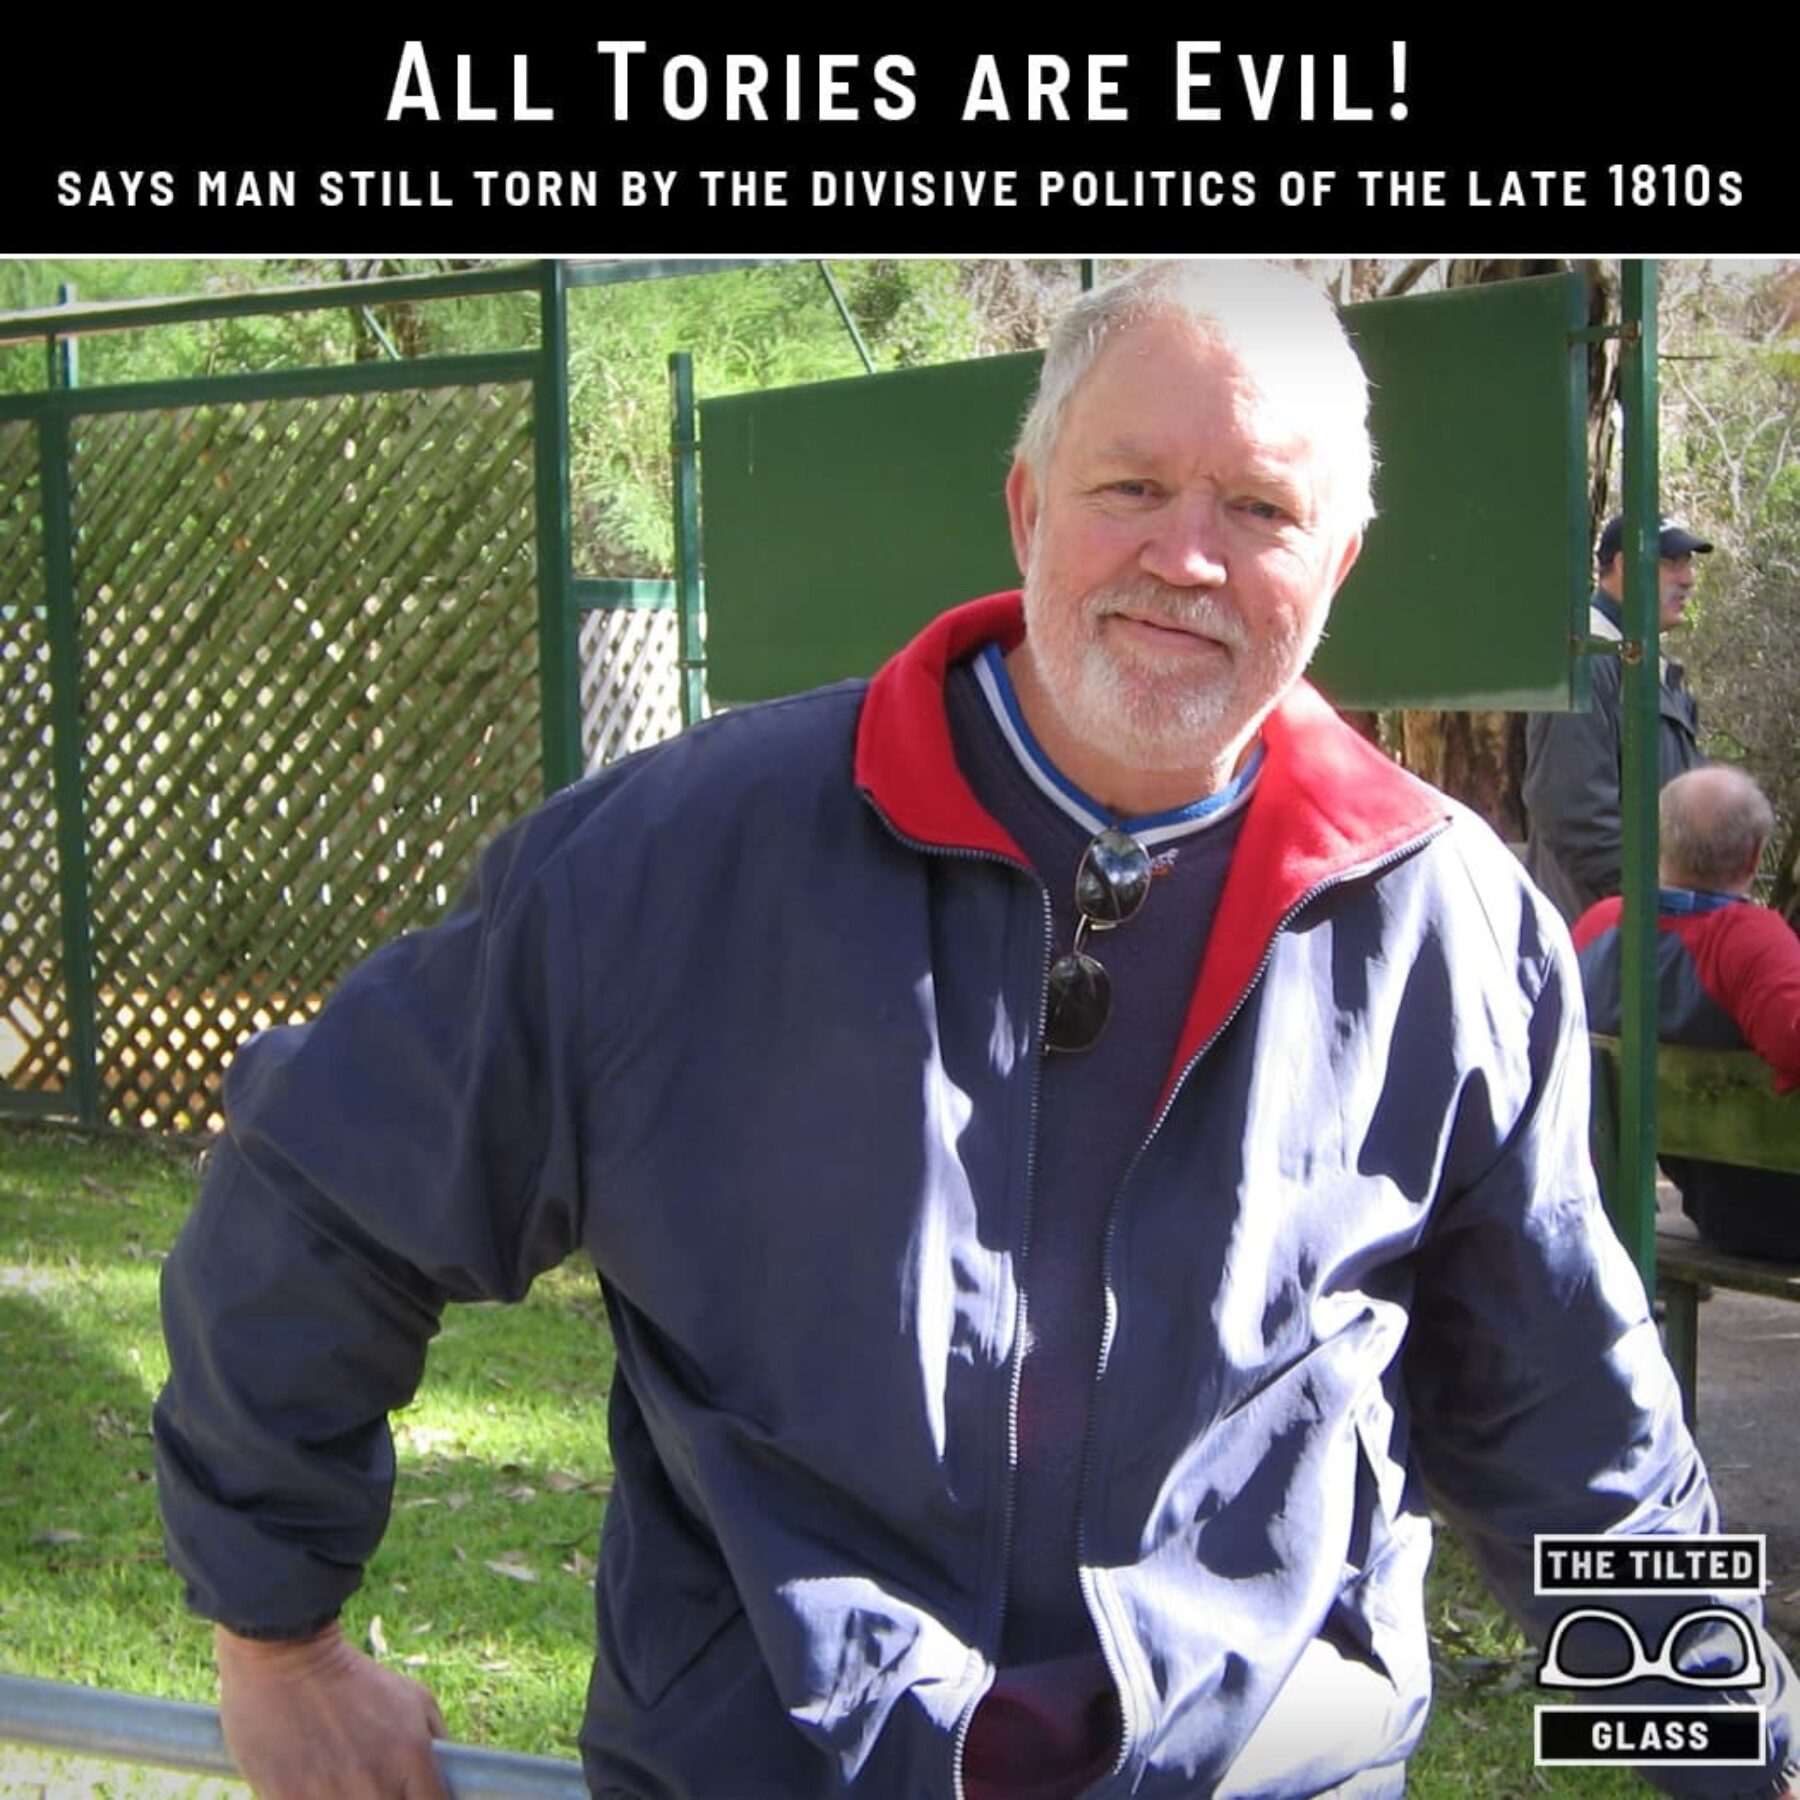 "All Tories are Evil!" says man still torn by the divisive politics of the late 1810s